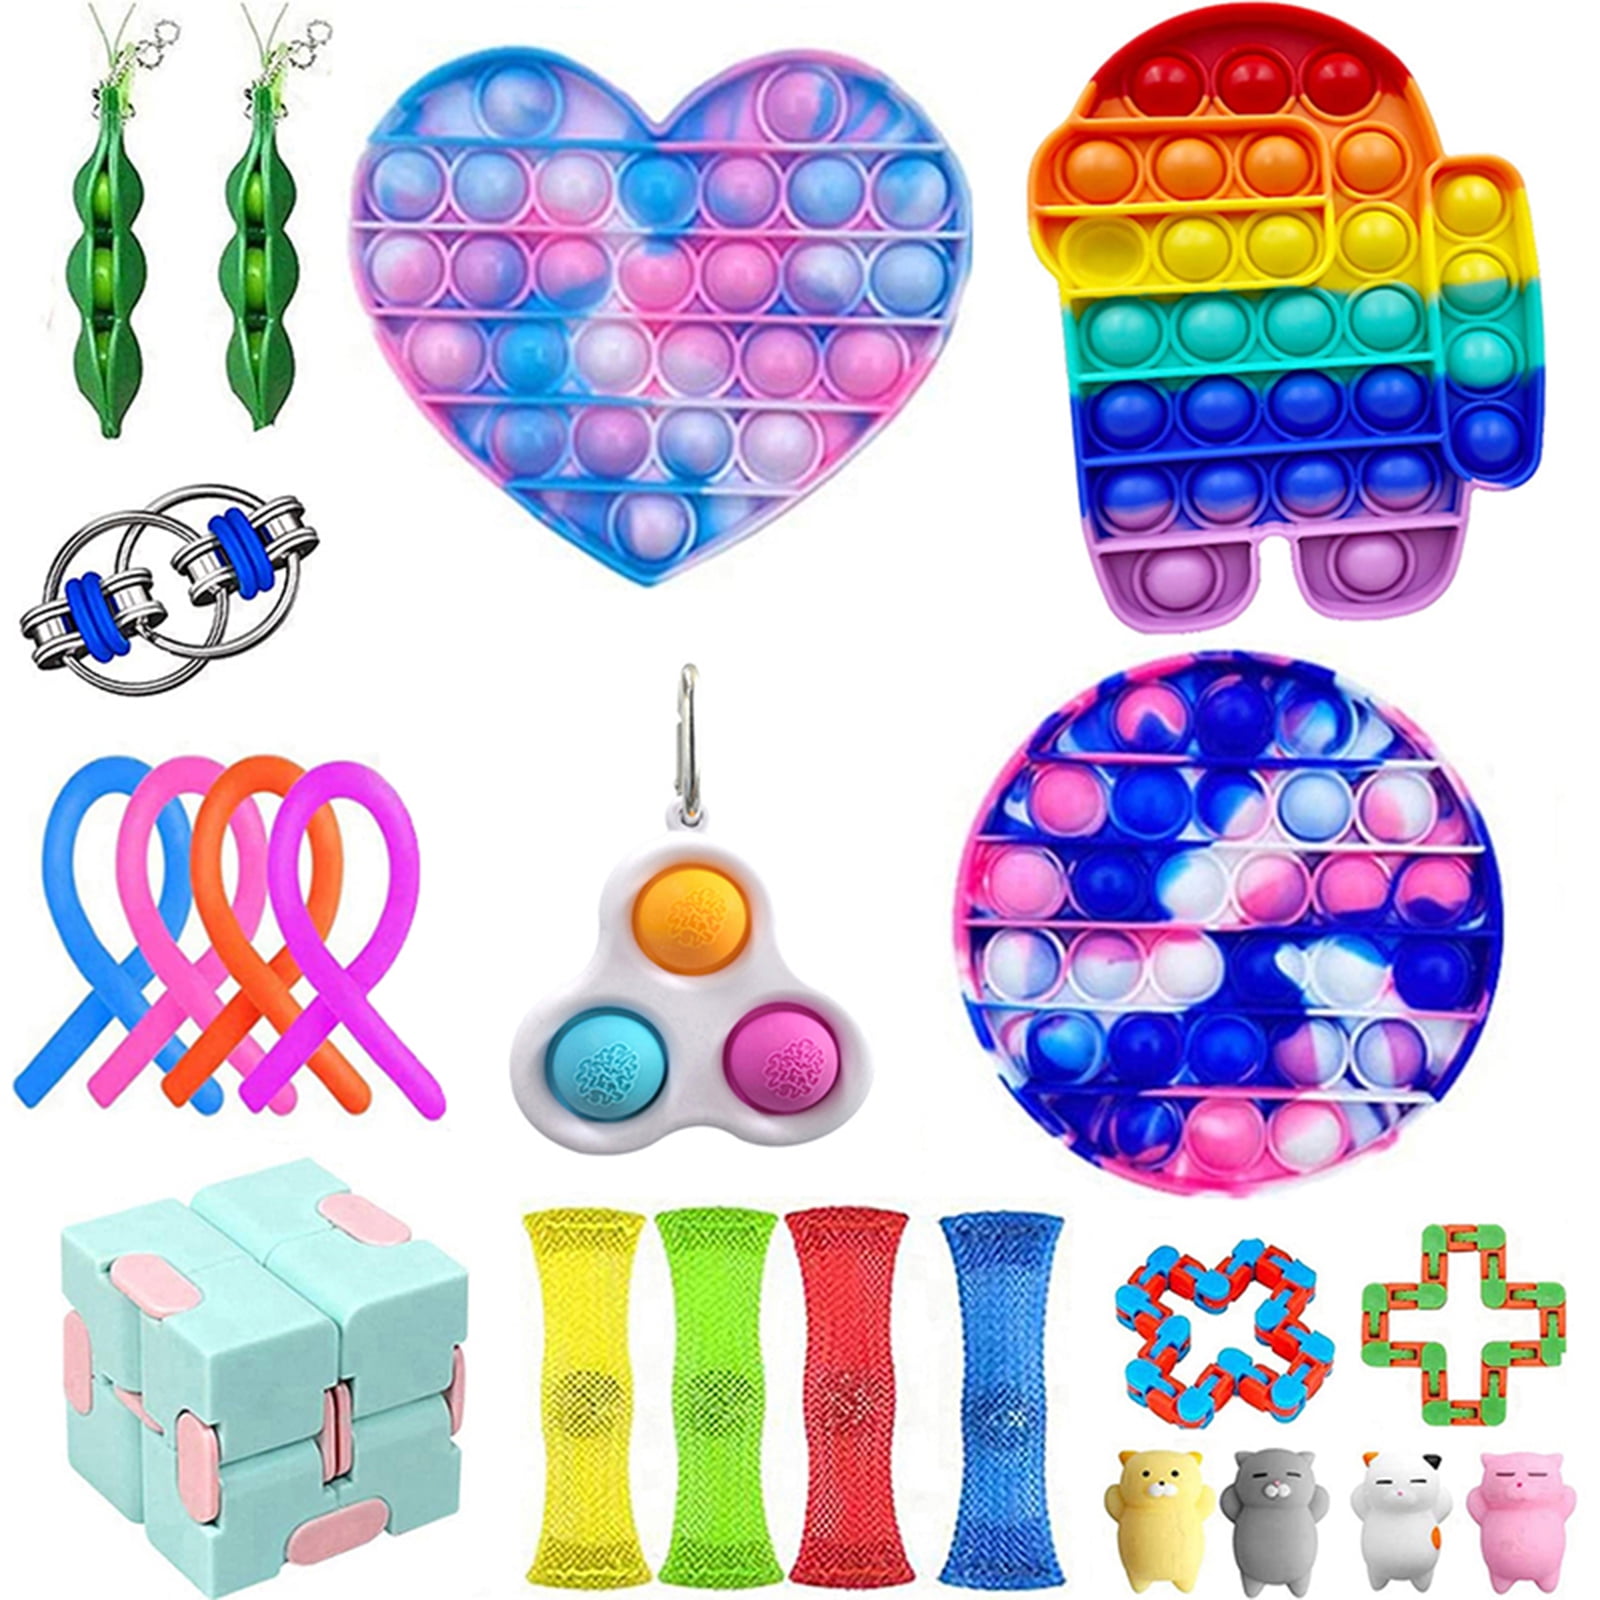 Sensory Fidget Toy Keychain Set Anti-Anxiety Pressure Relief Toys for ...